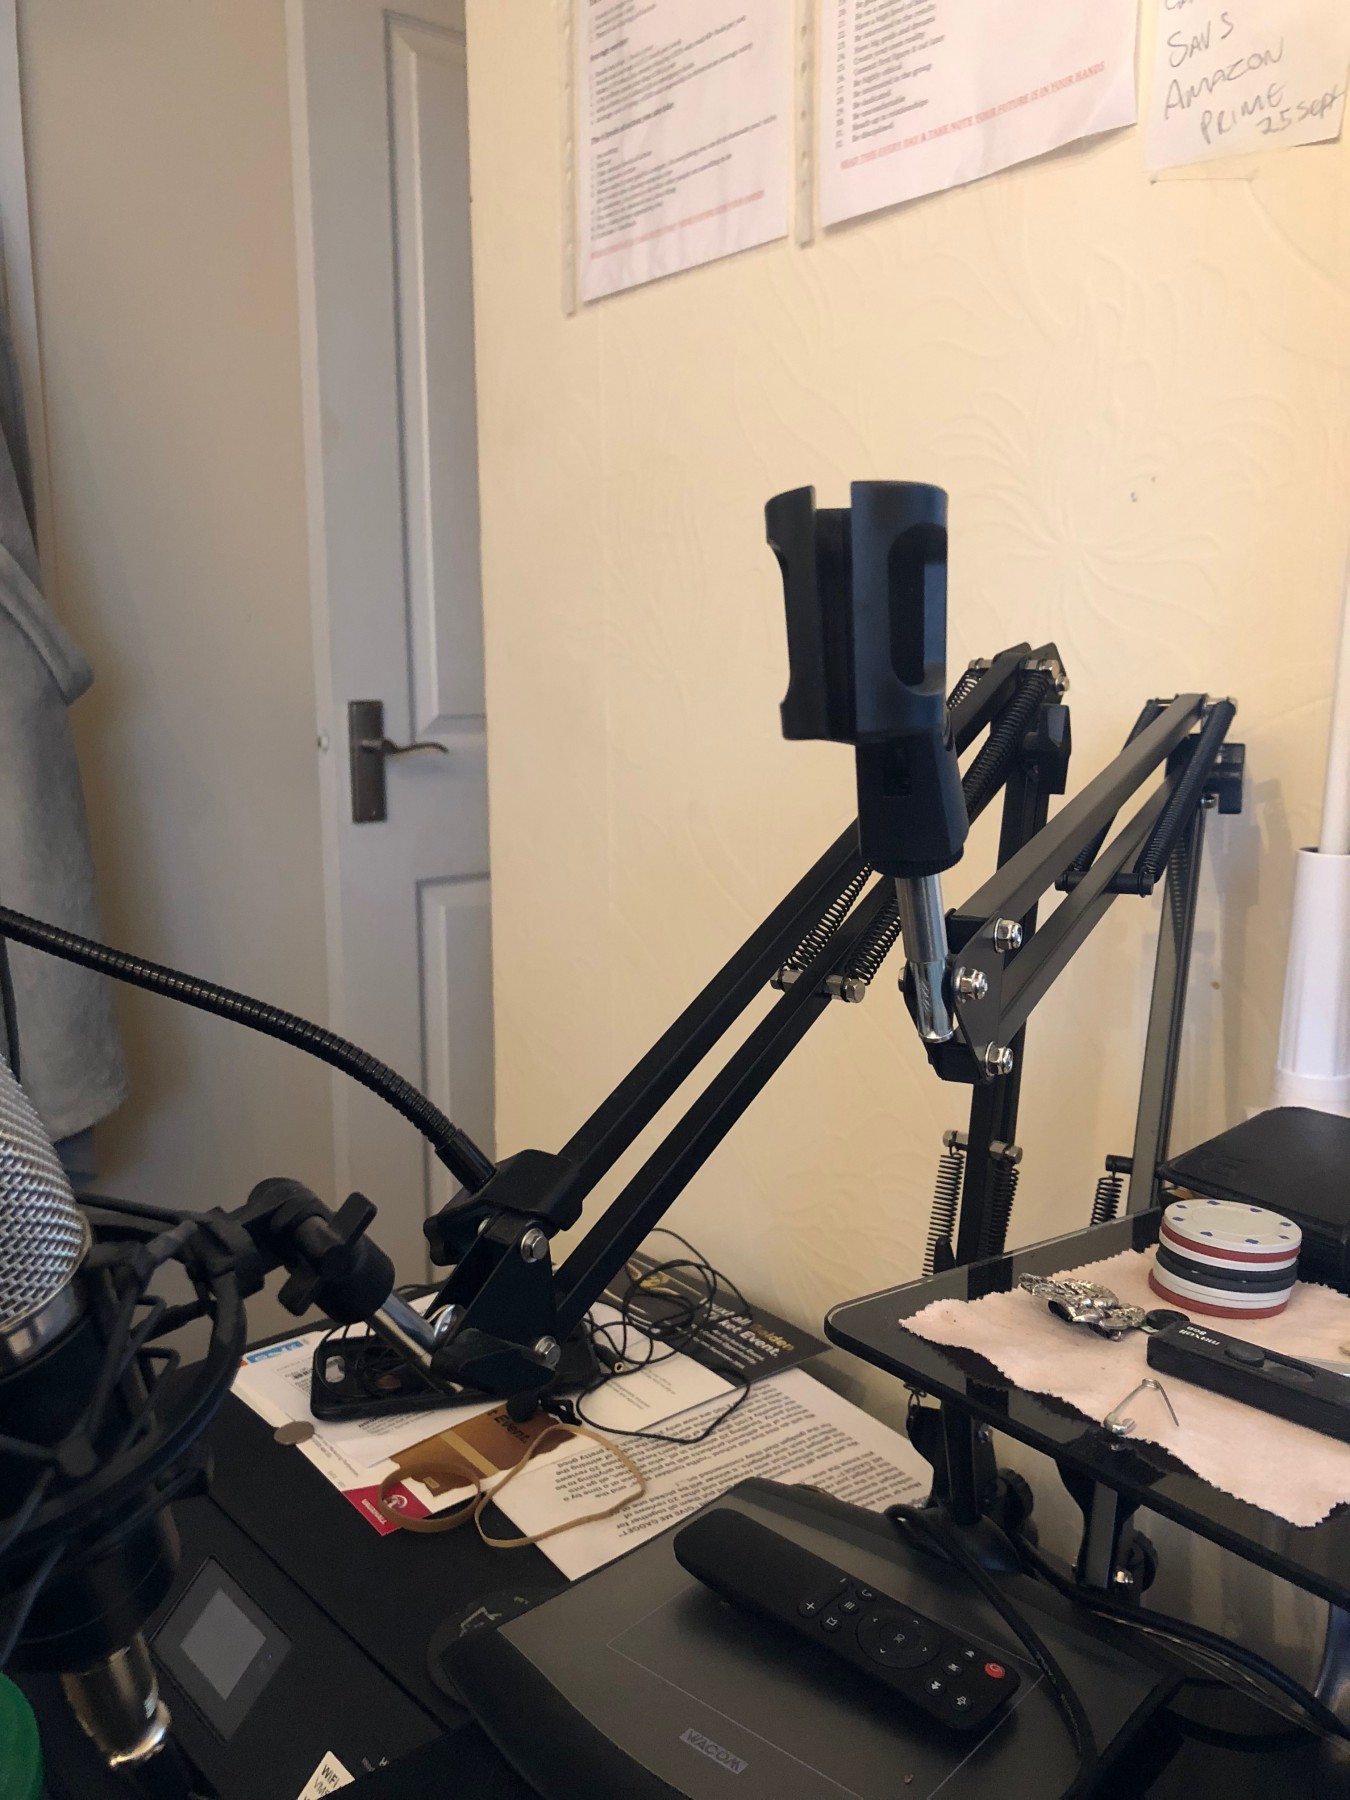 My Second Boom Arm Mic Accessories Holder